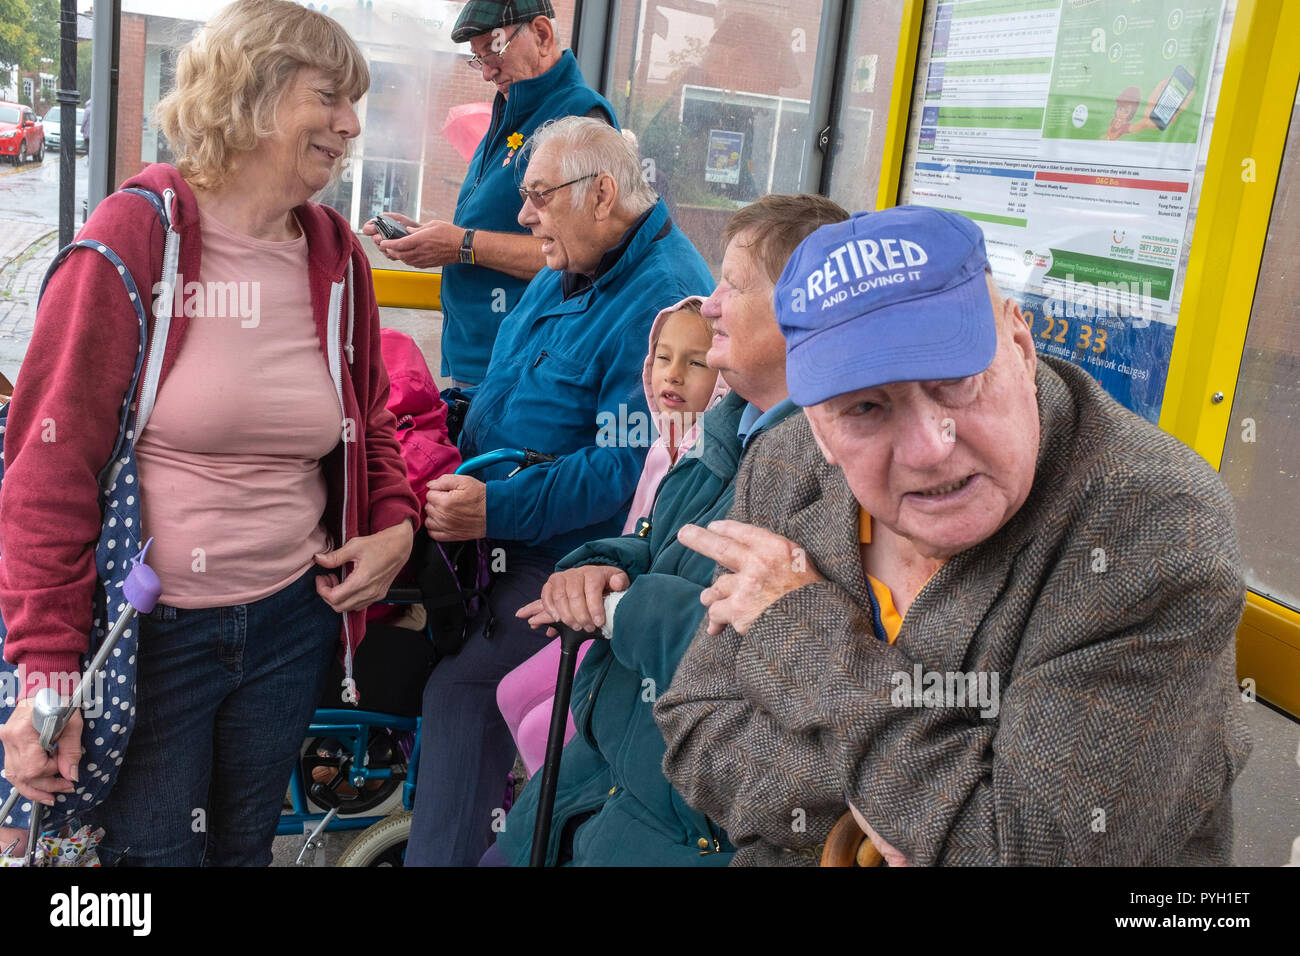 Pensioner wearing cap saying Retired and loving it at a bus station in Sandbach Cheshire UK Stock Photo